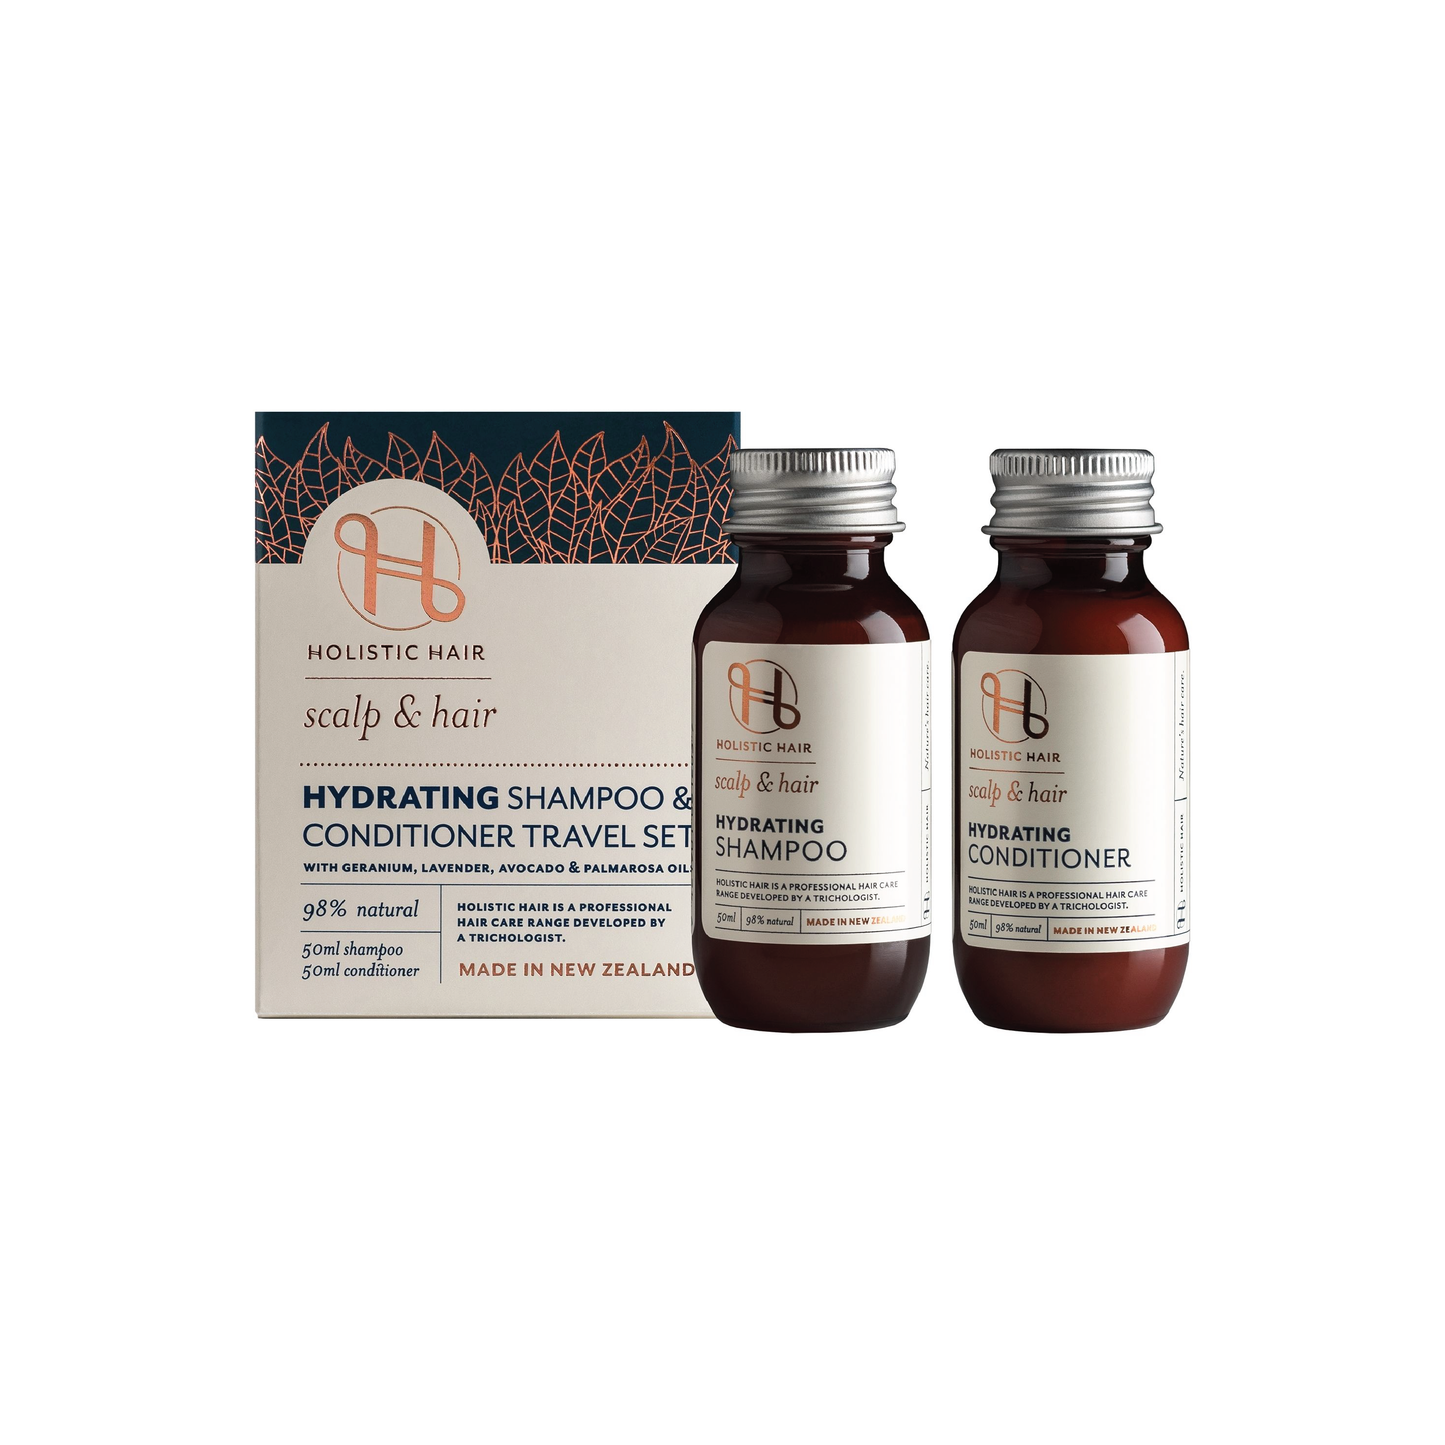 Holistic Hair Hydrating Shampoo and Conditioner Travel Set